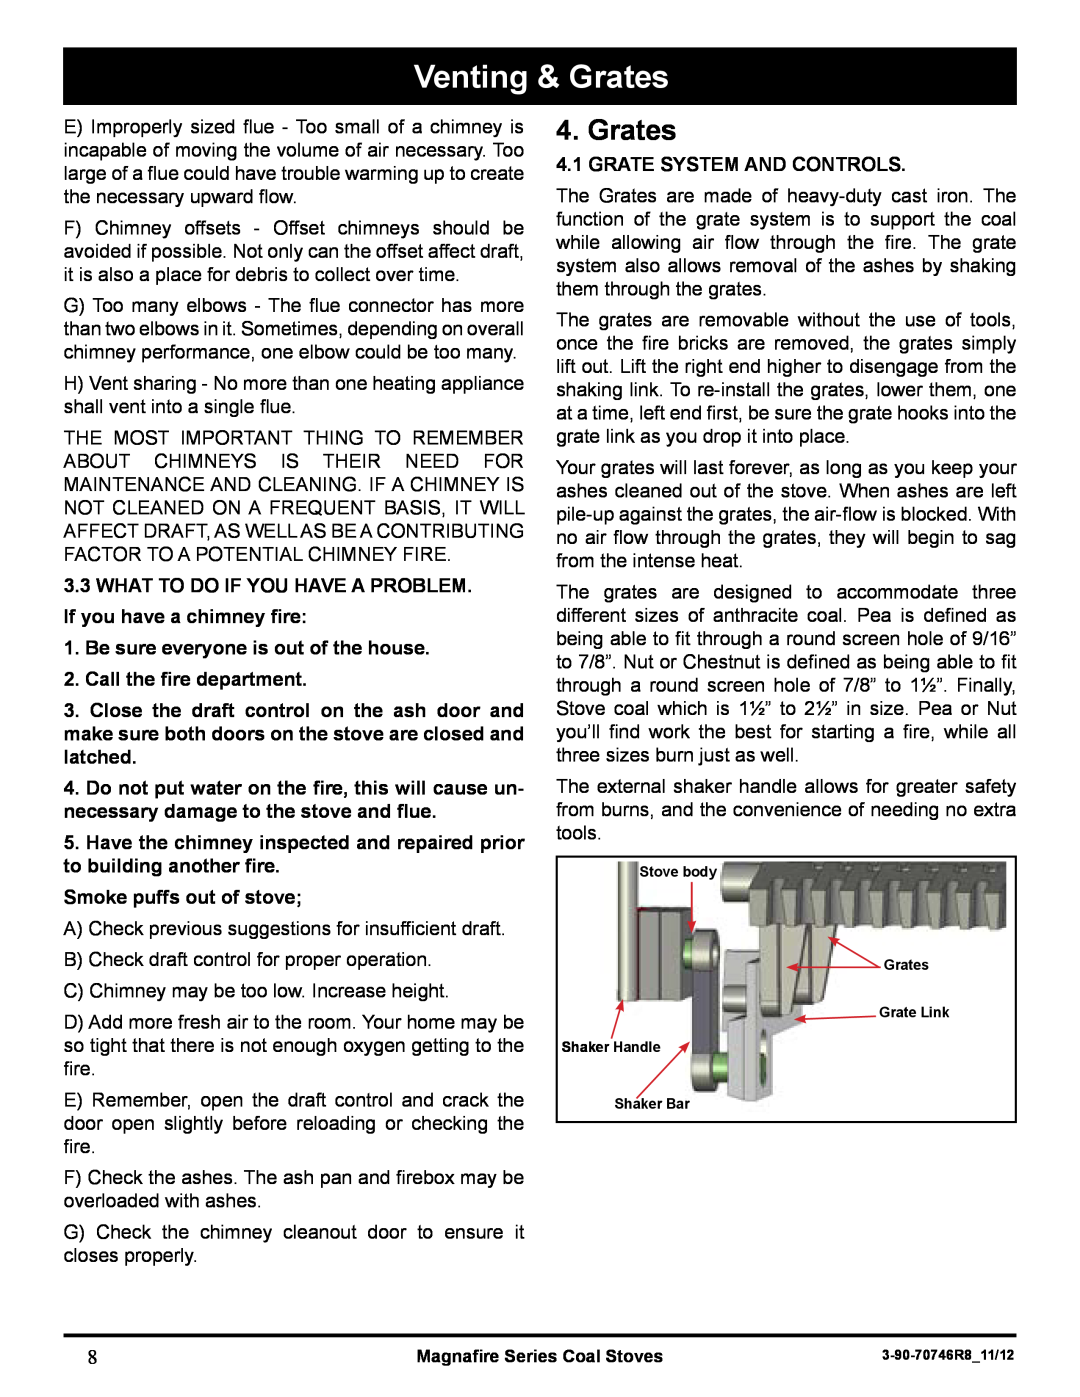 Harman Stove Company MARK III manual Venting & Grates, what to do if you have a problem. If you have a chimney fire 